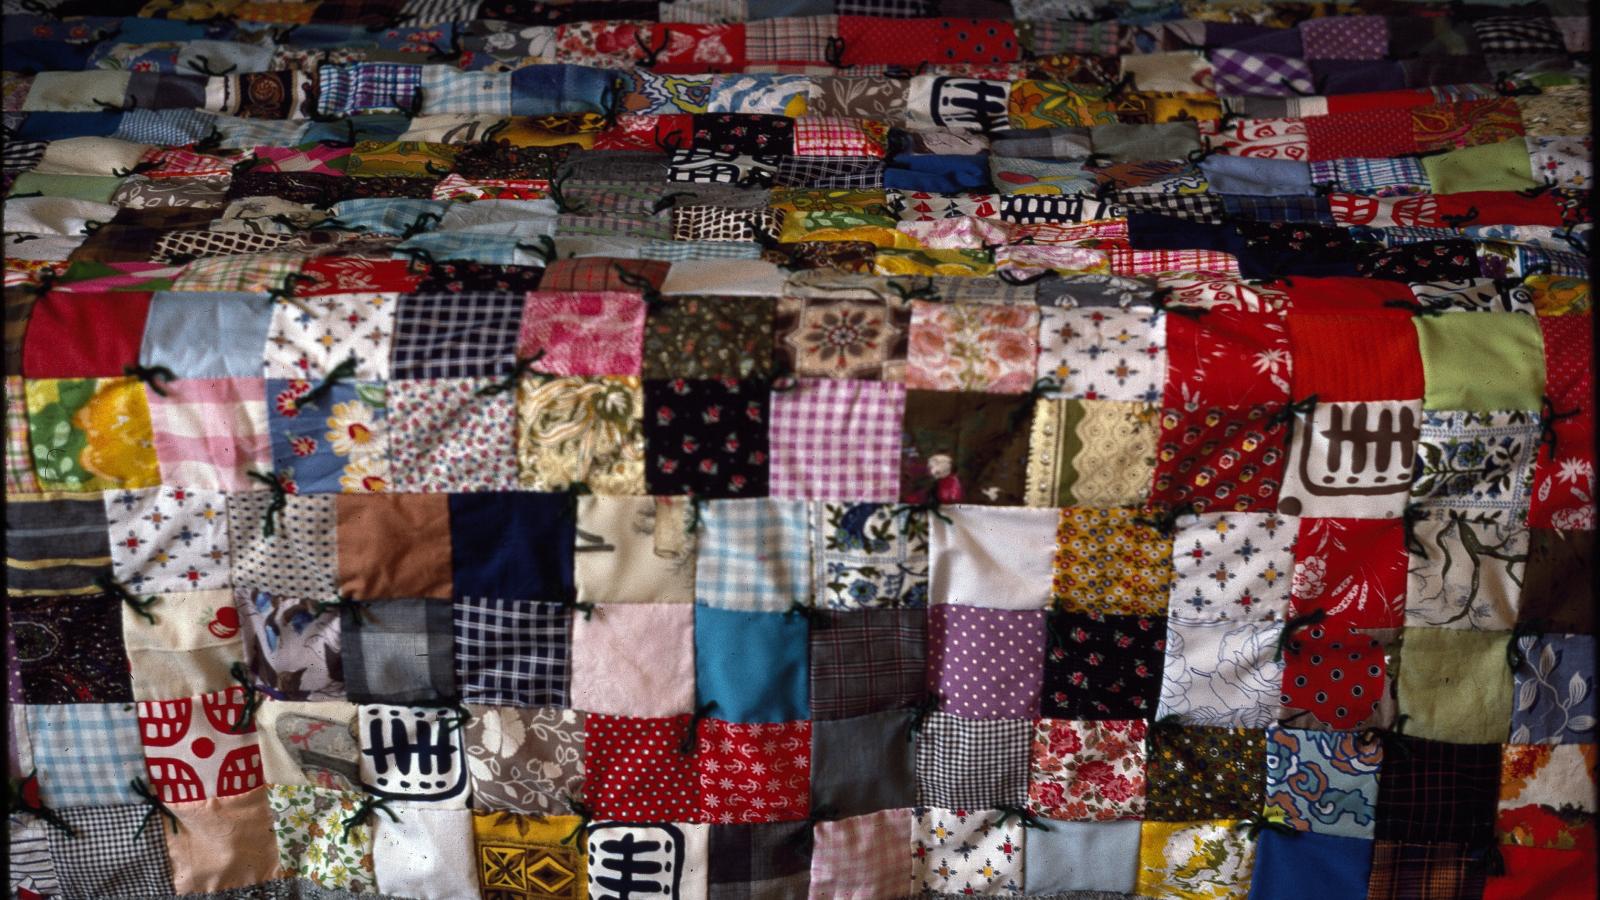 Variously colored patchwork quilt. Photograph from Connie Higdon's survey of potential festival participants.